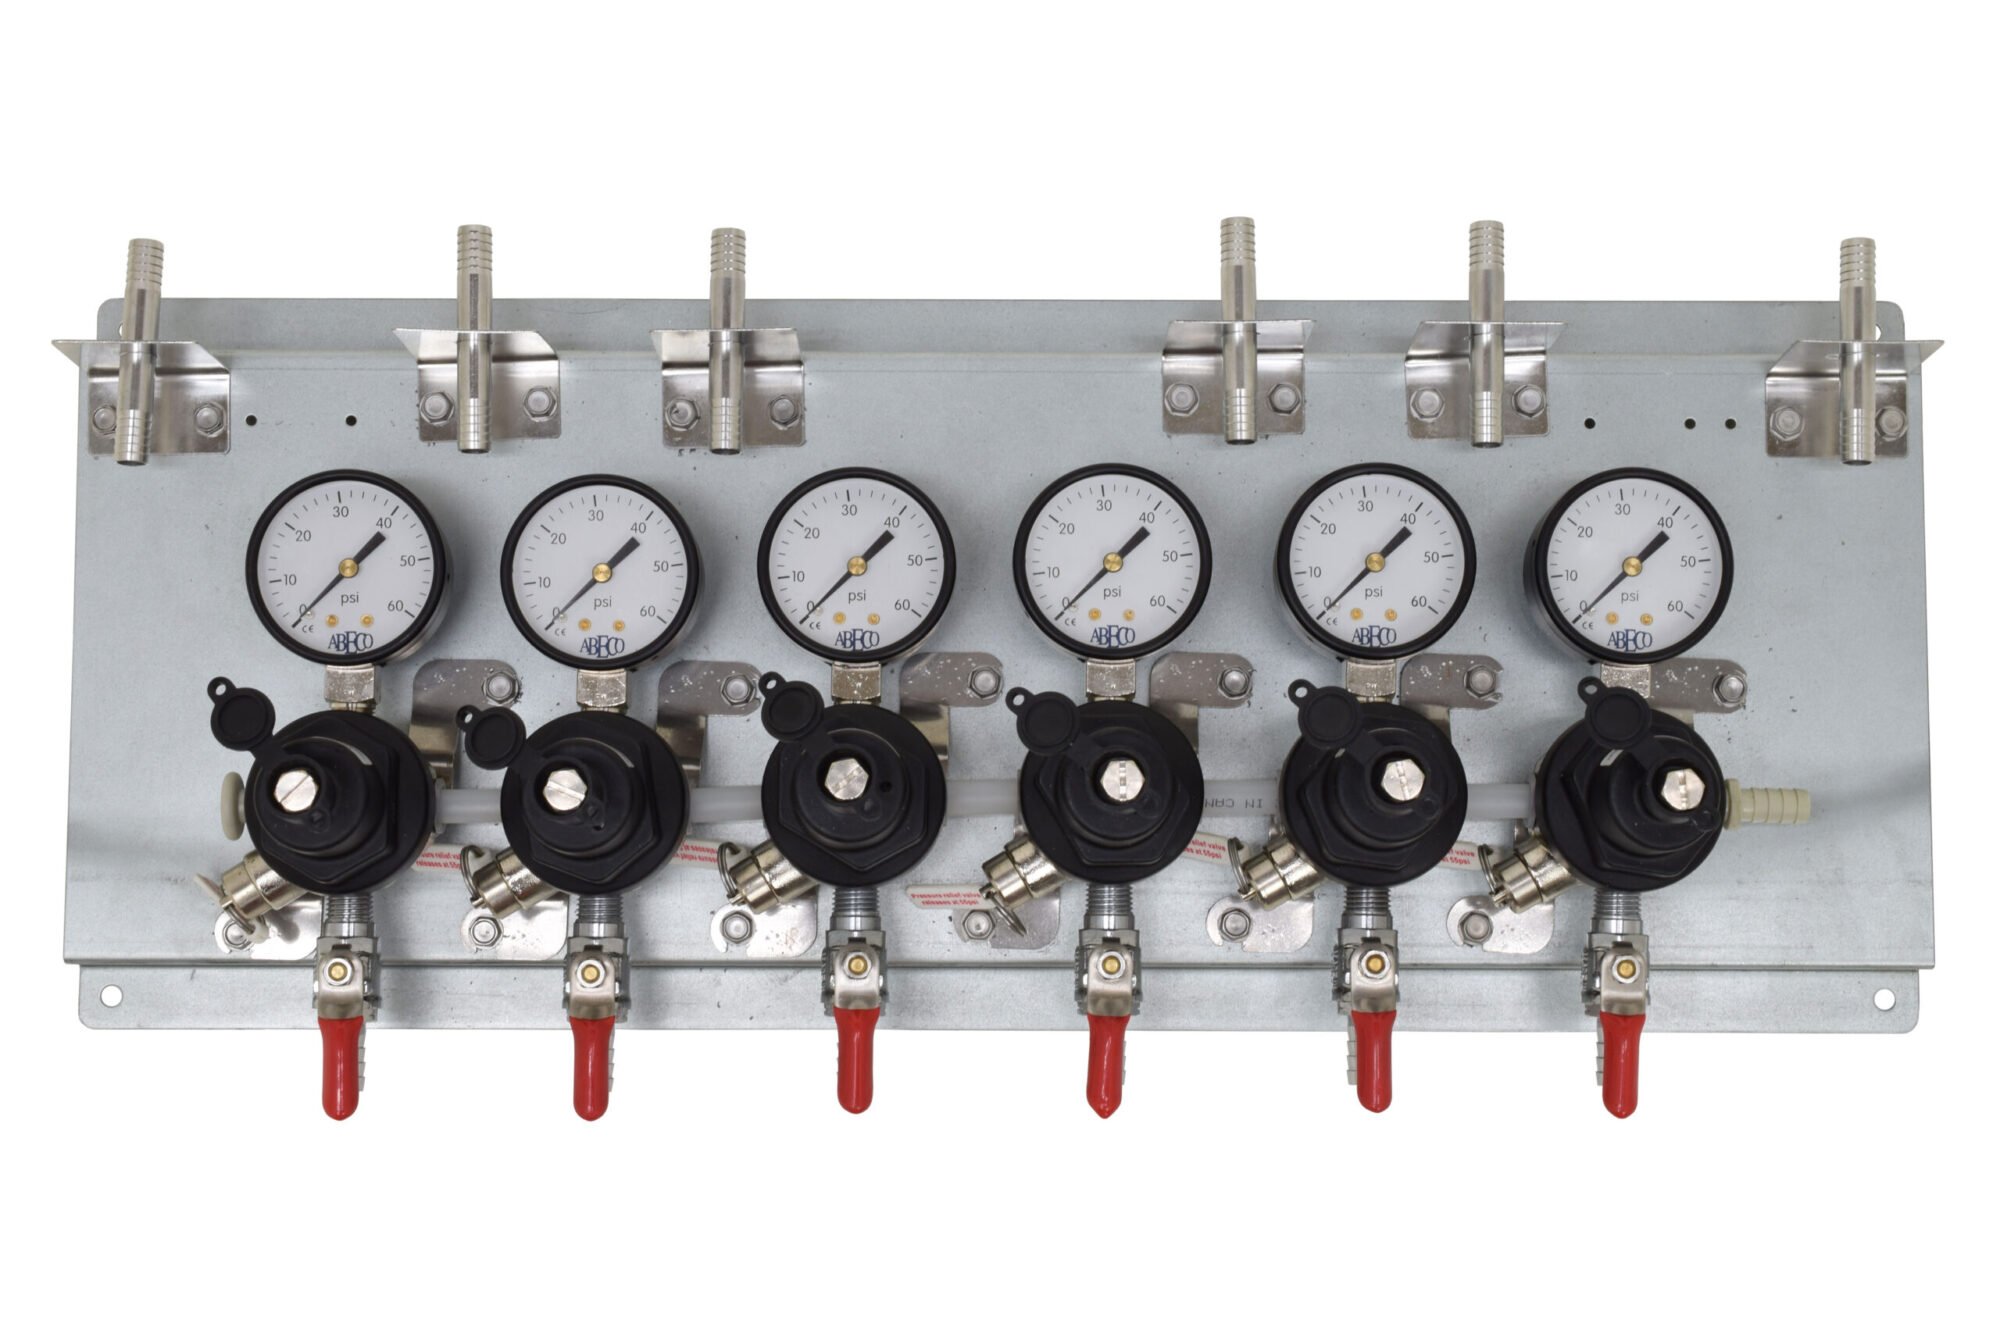 2706P Six Pressure TecFlo Secondary Assemblie on a Panel With Wall Brackets